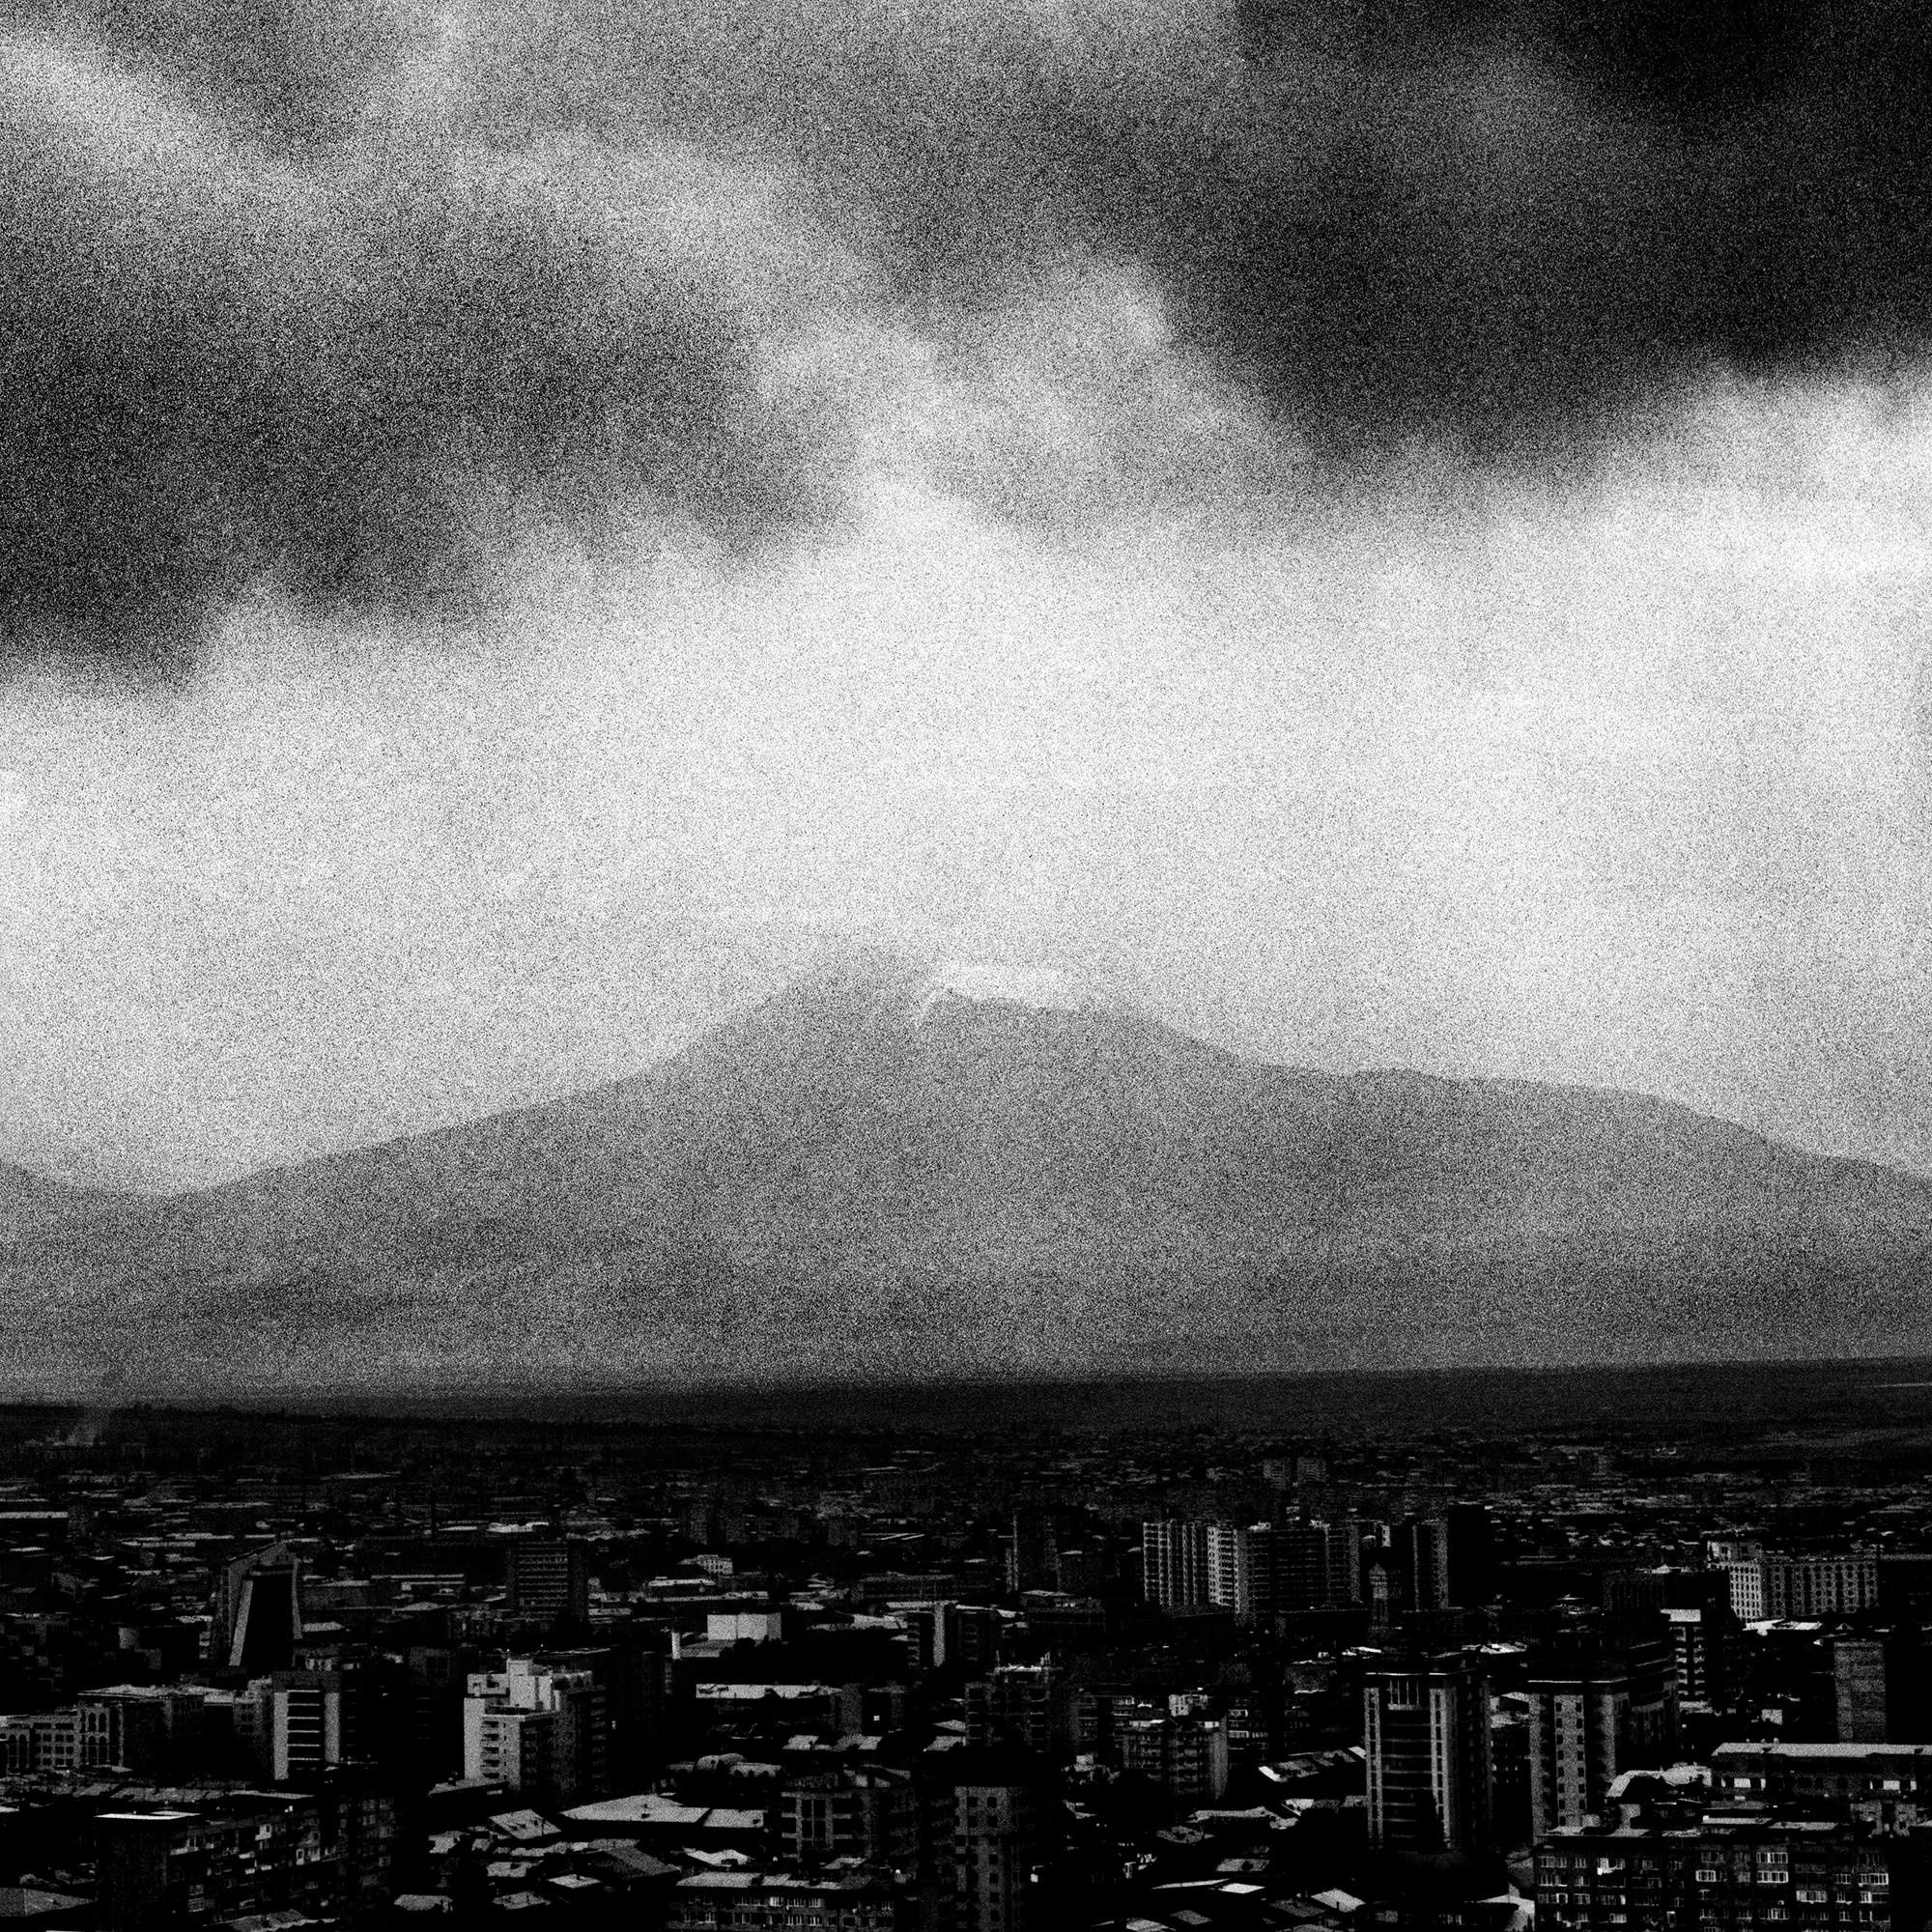 Storm Over Yerevan, contemporary photo, cityscape, climate, black and white - Photograph by Osheen Harruthoonyan